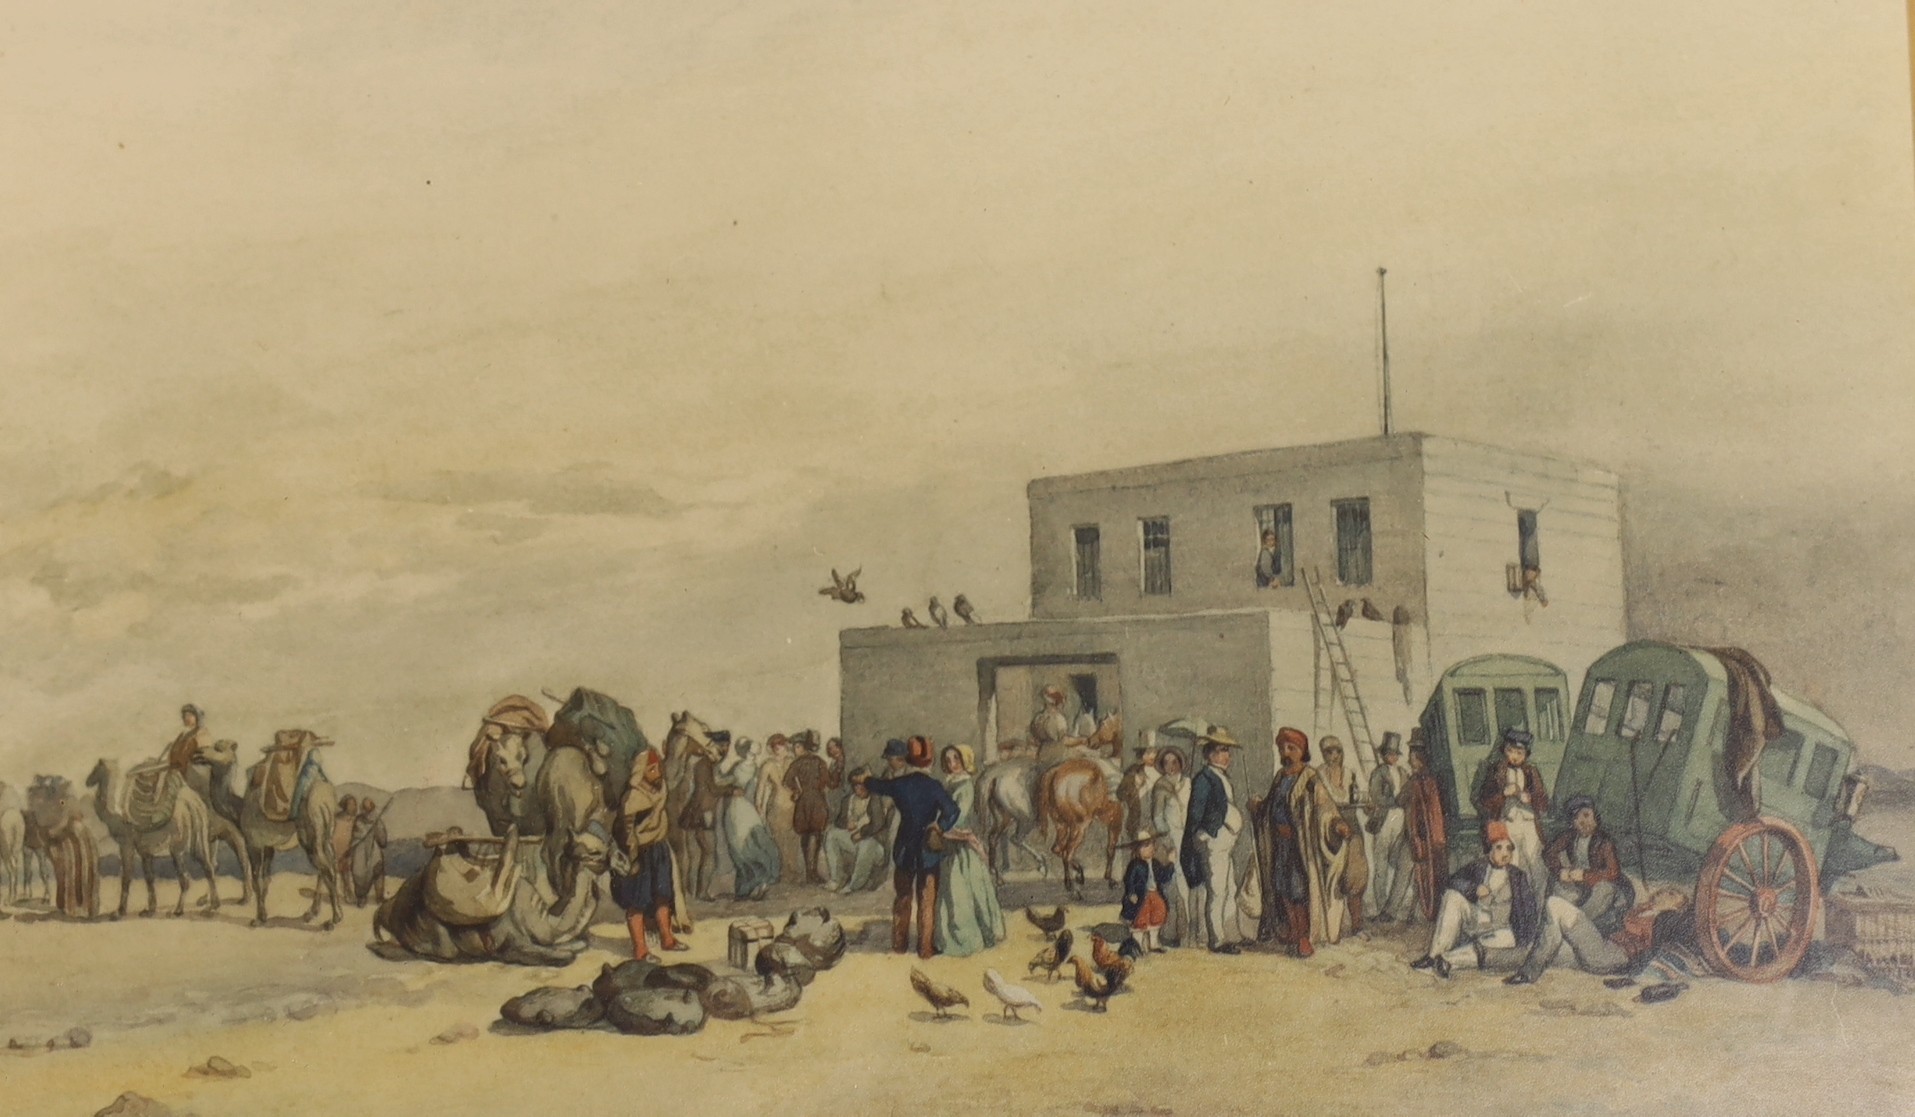 After Henry Fitzcook, six colour prints, 'The overland route to India', together with four colour prints after Turner, largest 15 x 23cm